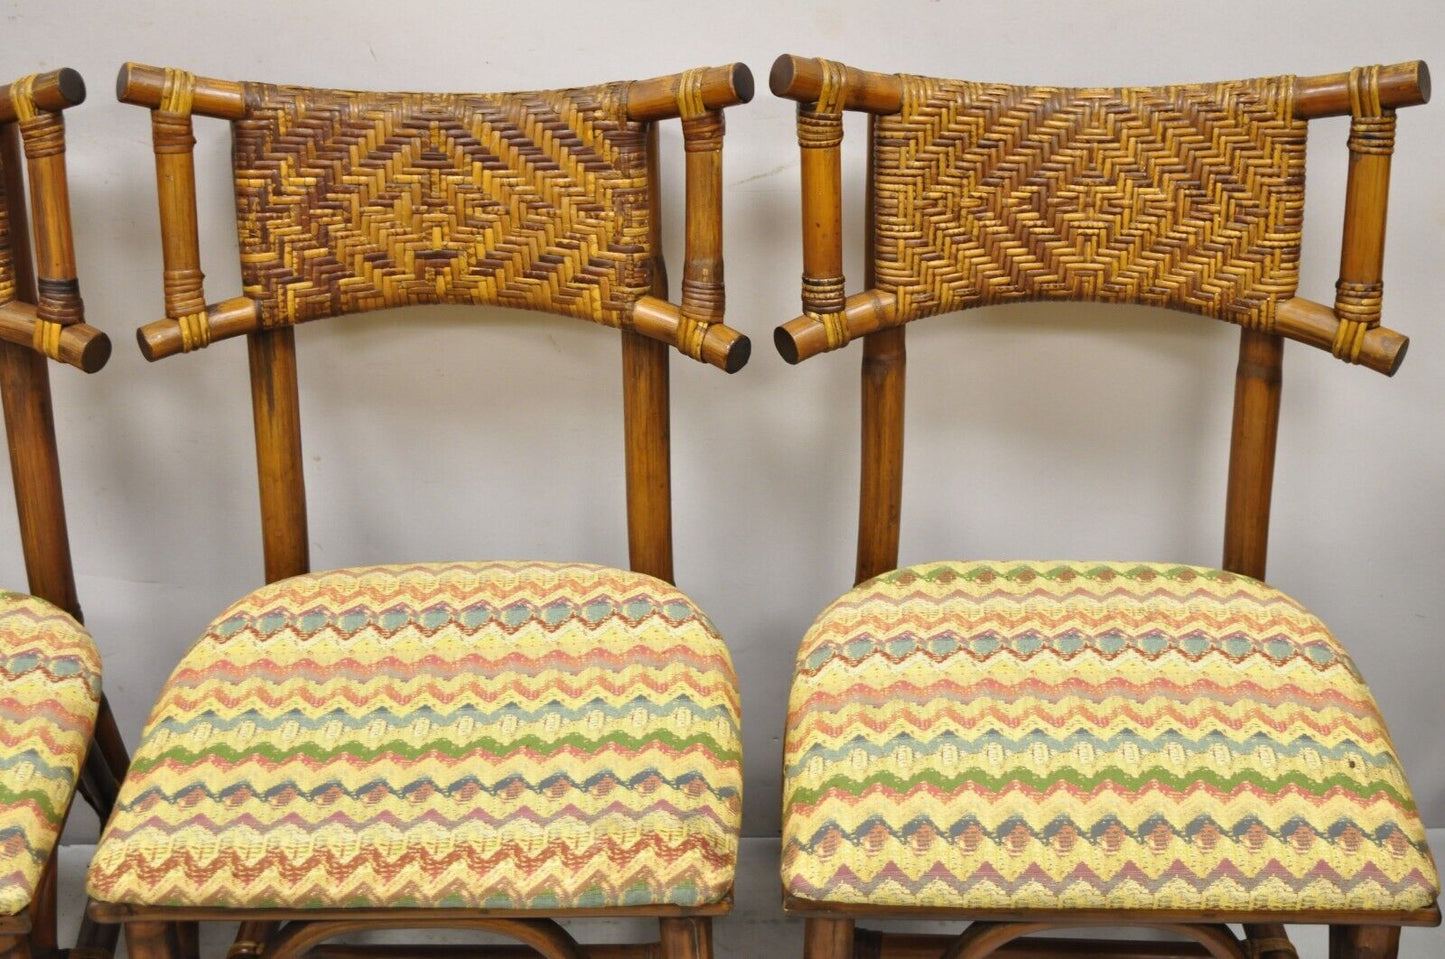 Vintage Bentwood Bamboo Rattan Tiki Hollywood Regency Dining Chairs - Set of 4